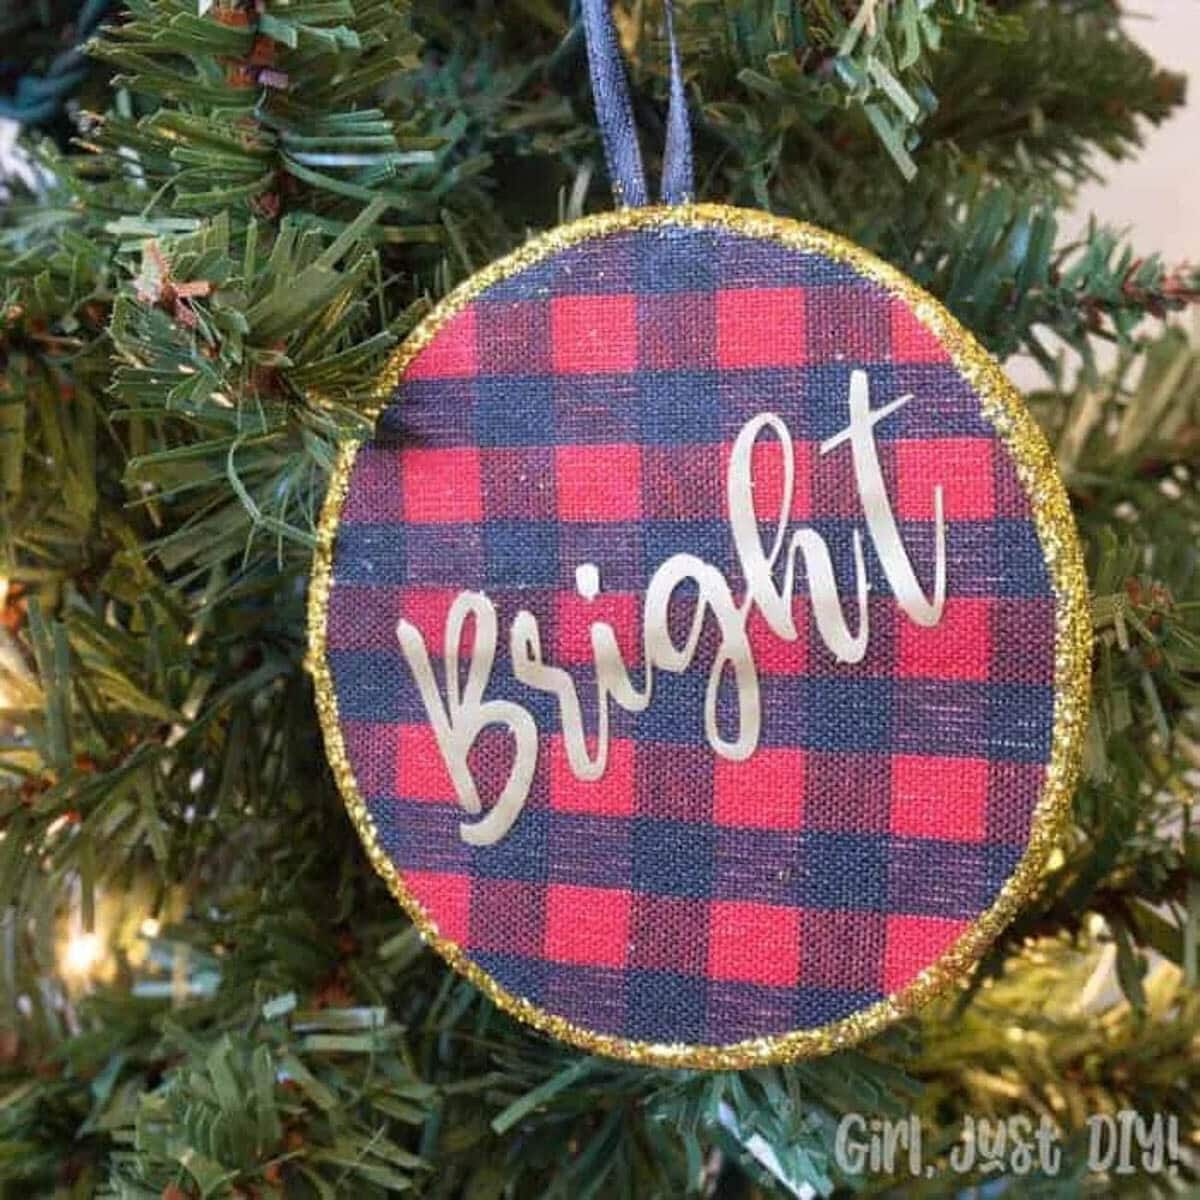 Plaid ornament with "Bright" added using Cricut